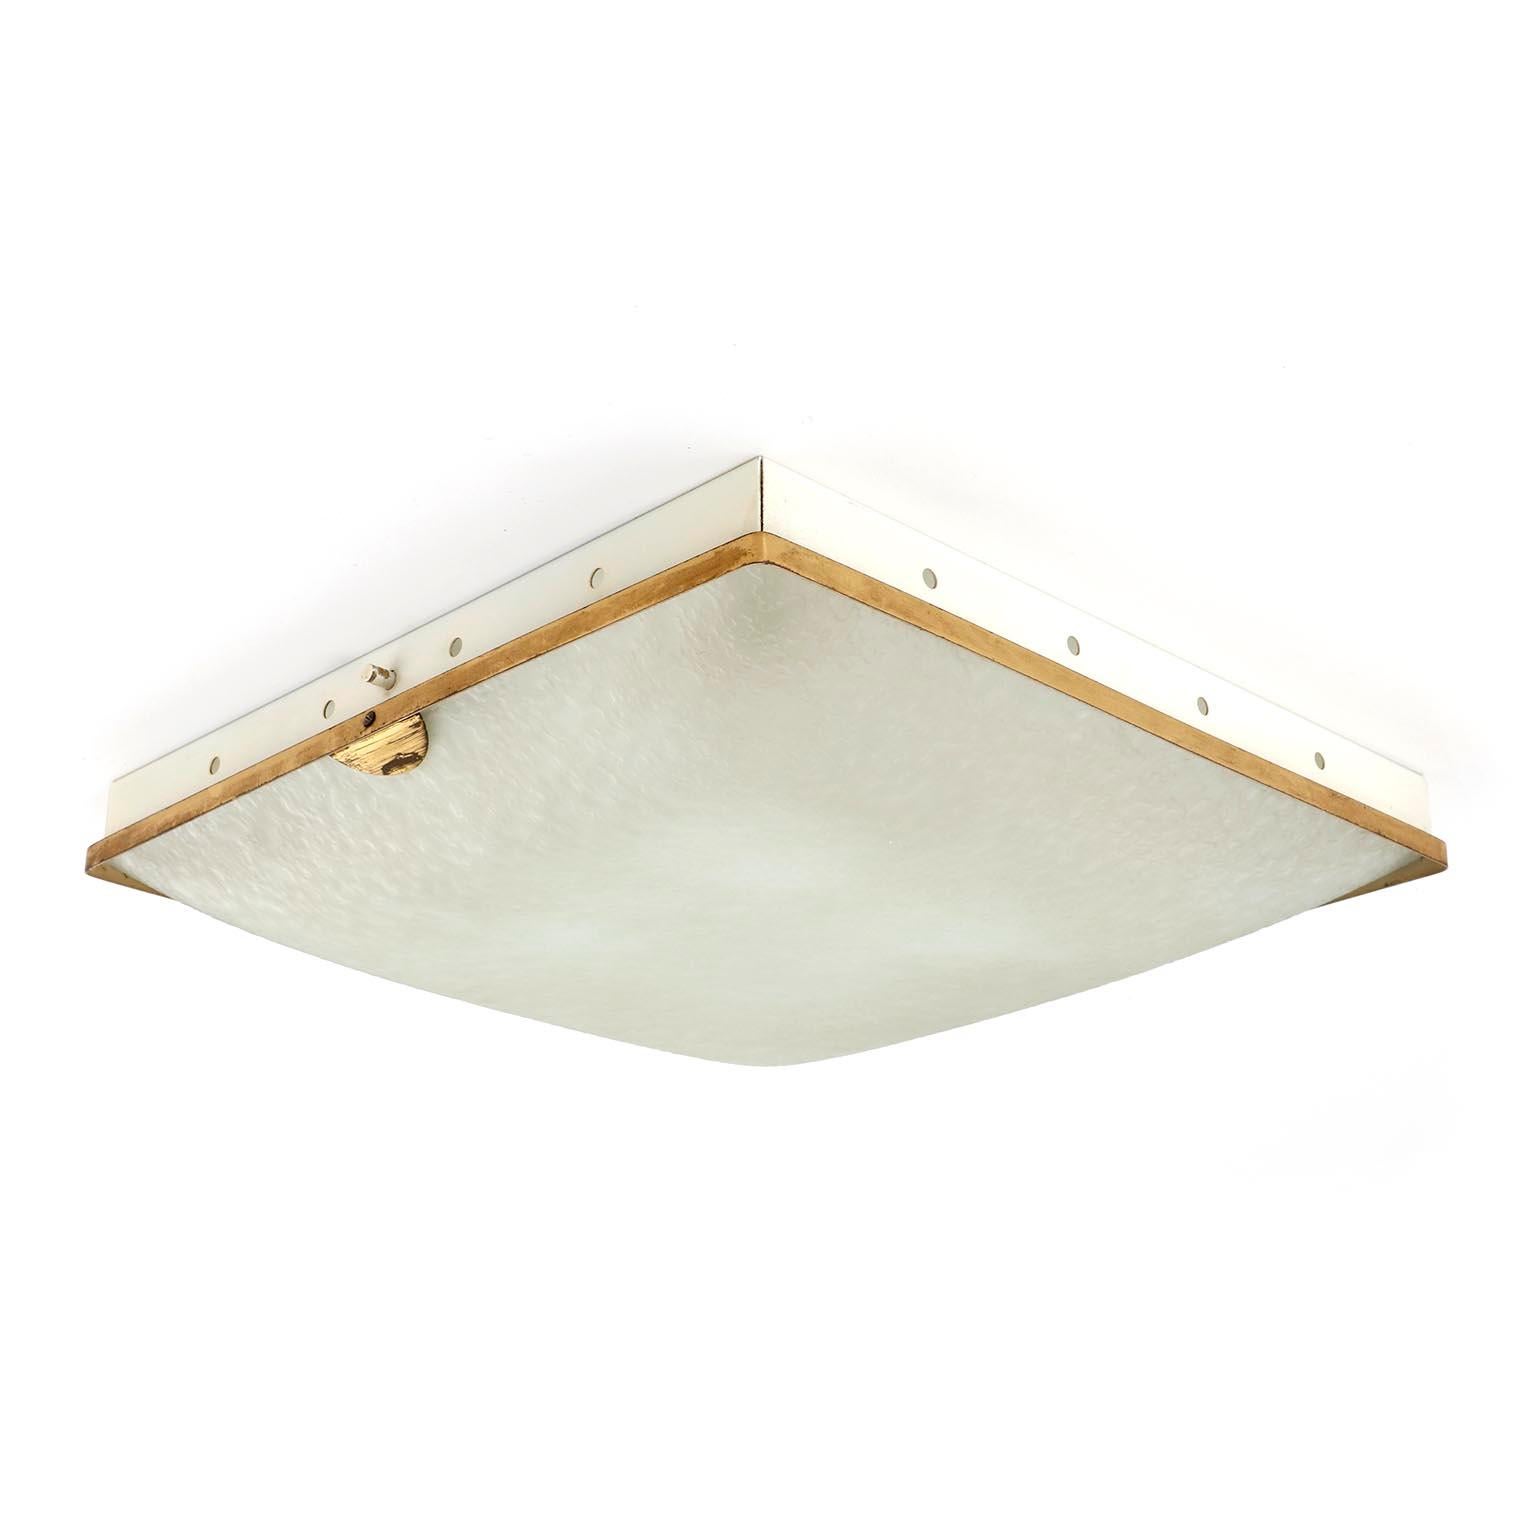 A square flushmount light or wall light fixture by Fontana Arte, Italy, manufactured in midcentury circa 1950.
The lamp is made of a white painted backplate, polished brass with lovely patina, and a slightly domed satined glass lamp shade with an